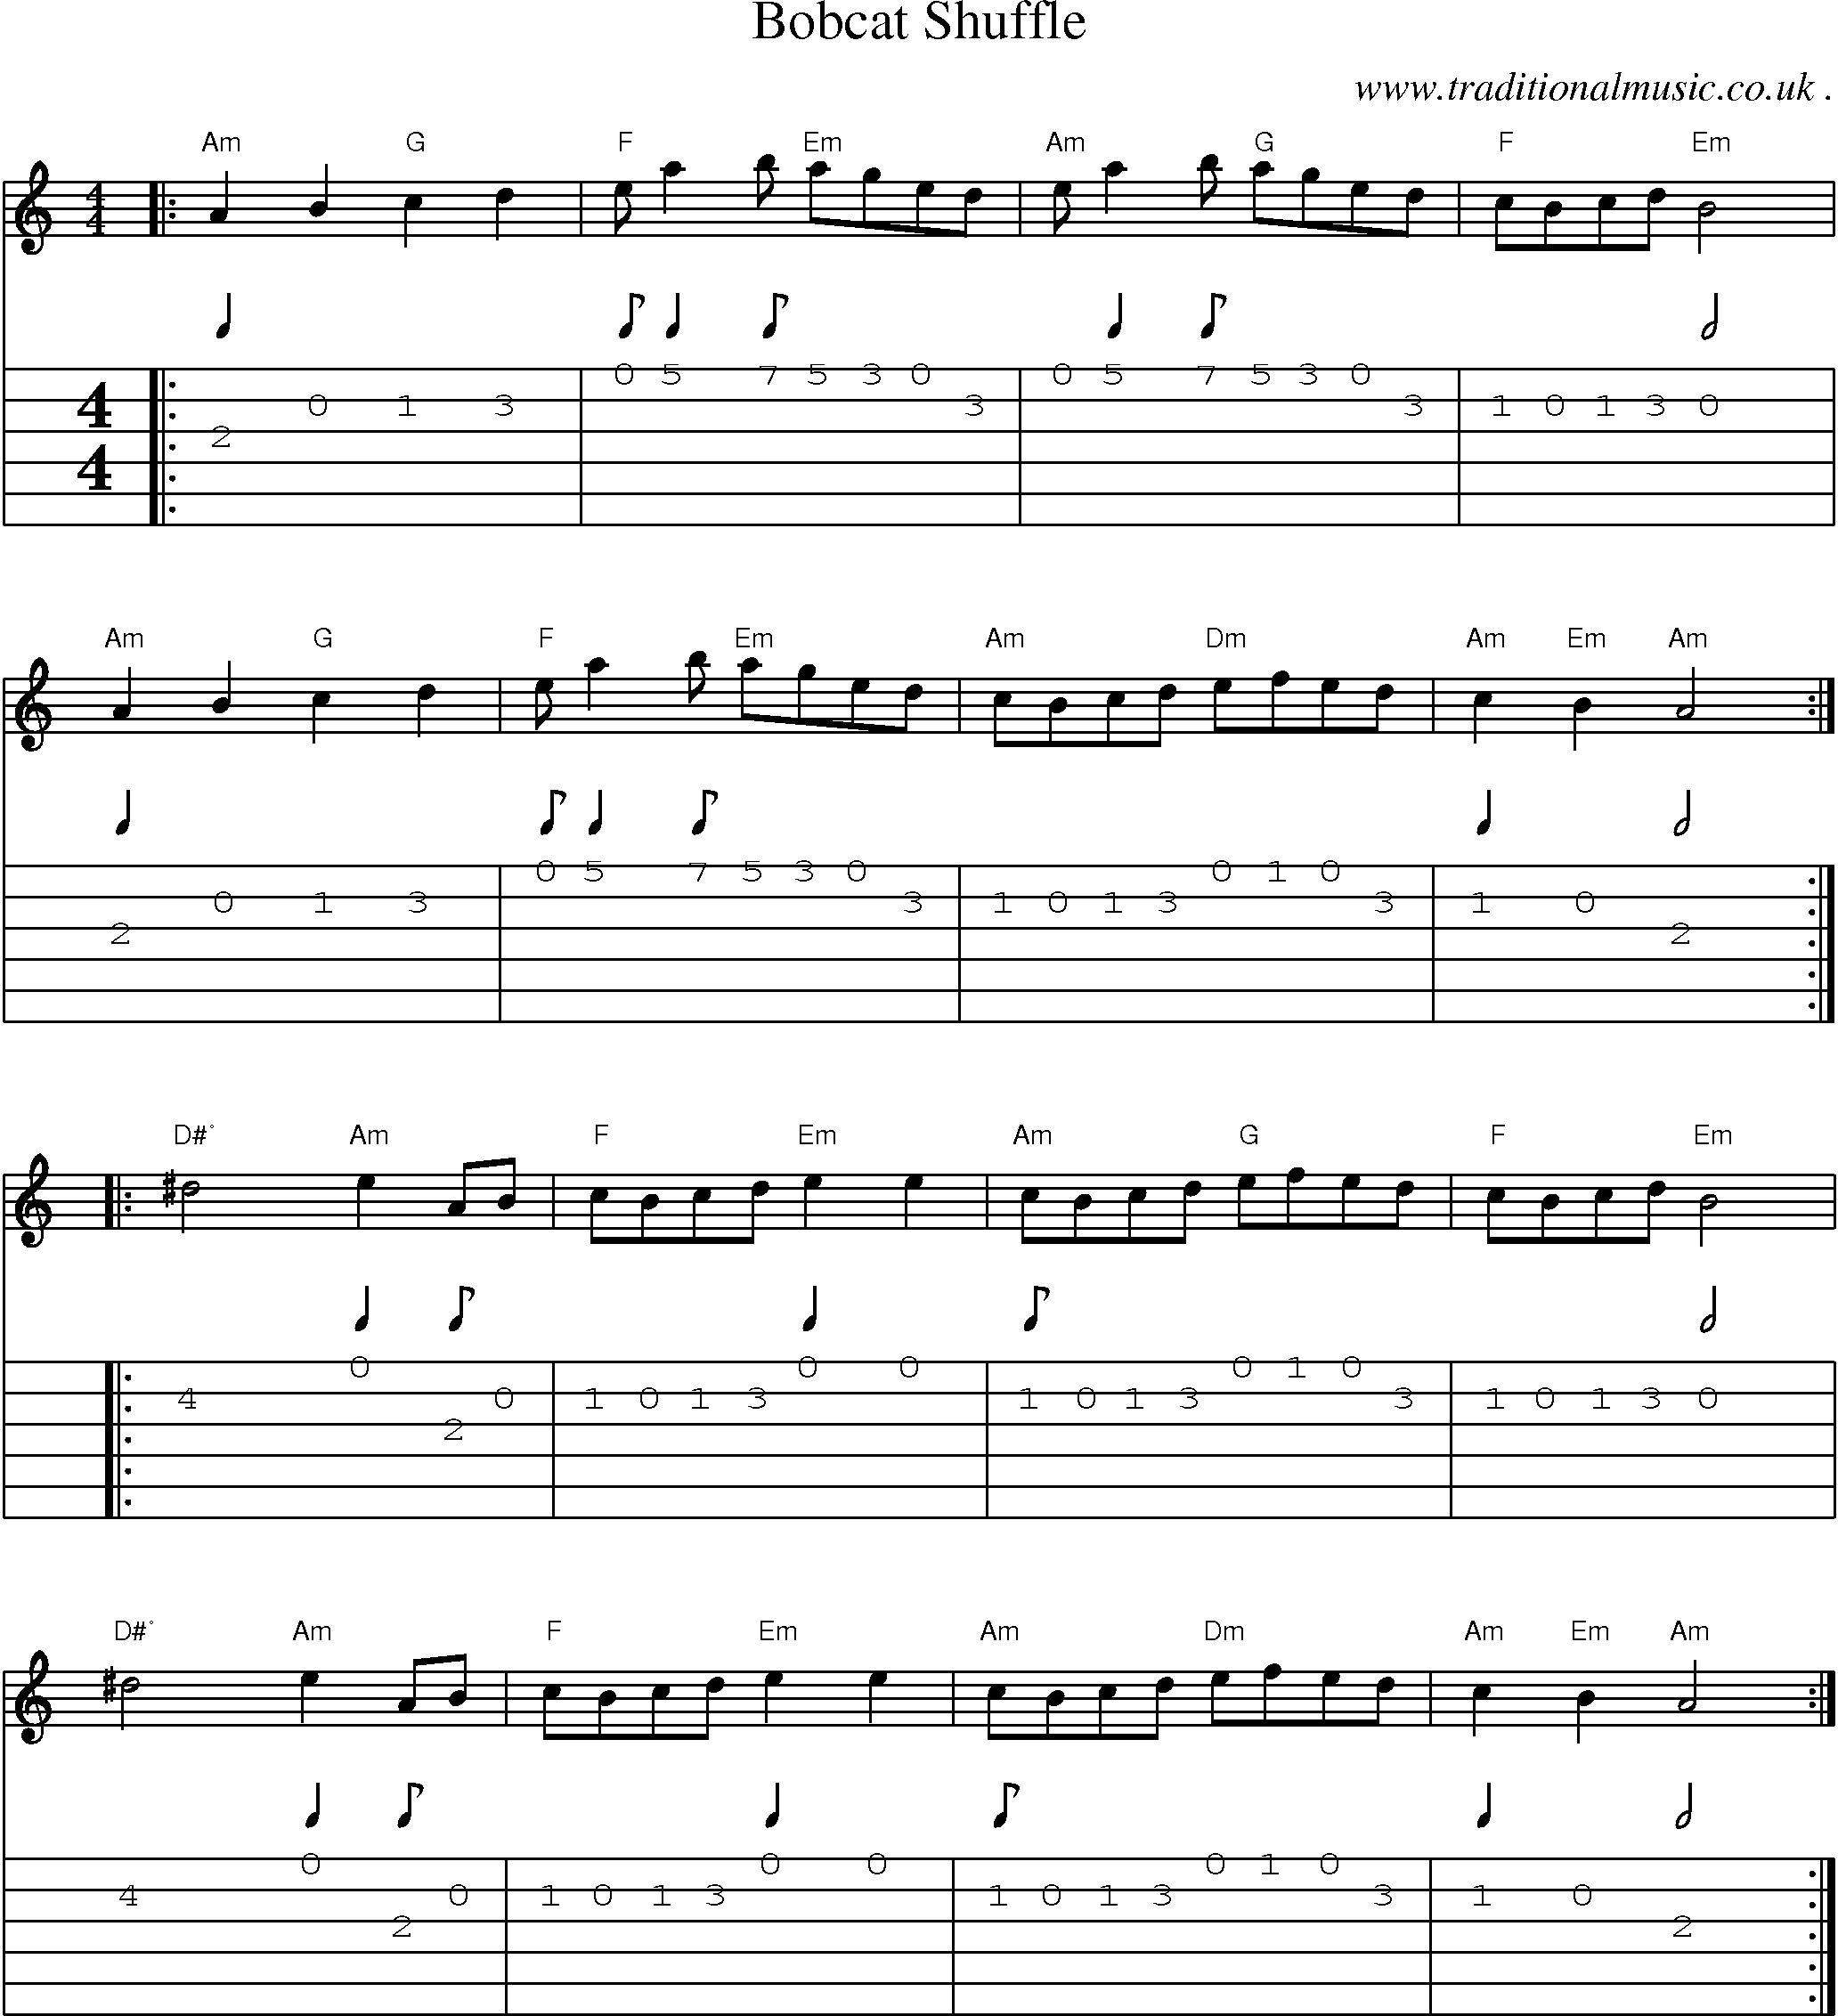 Music Score and Guitar Tabs for Bobcat Shuffle